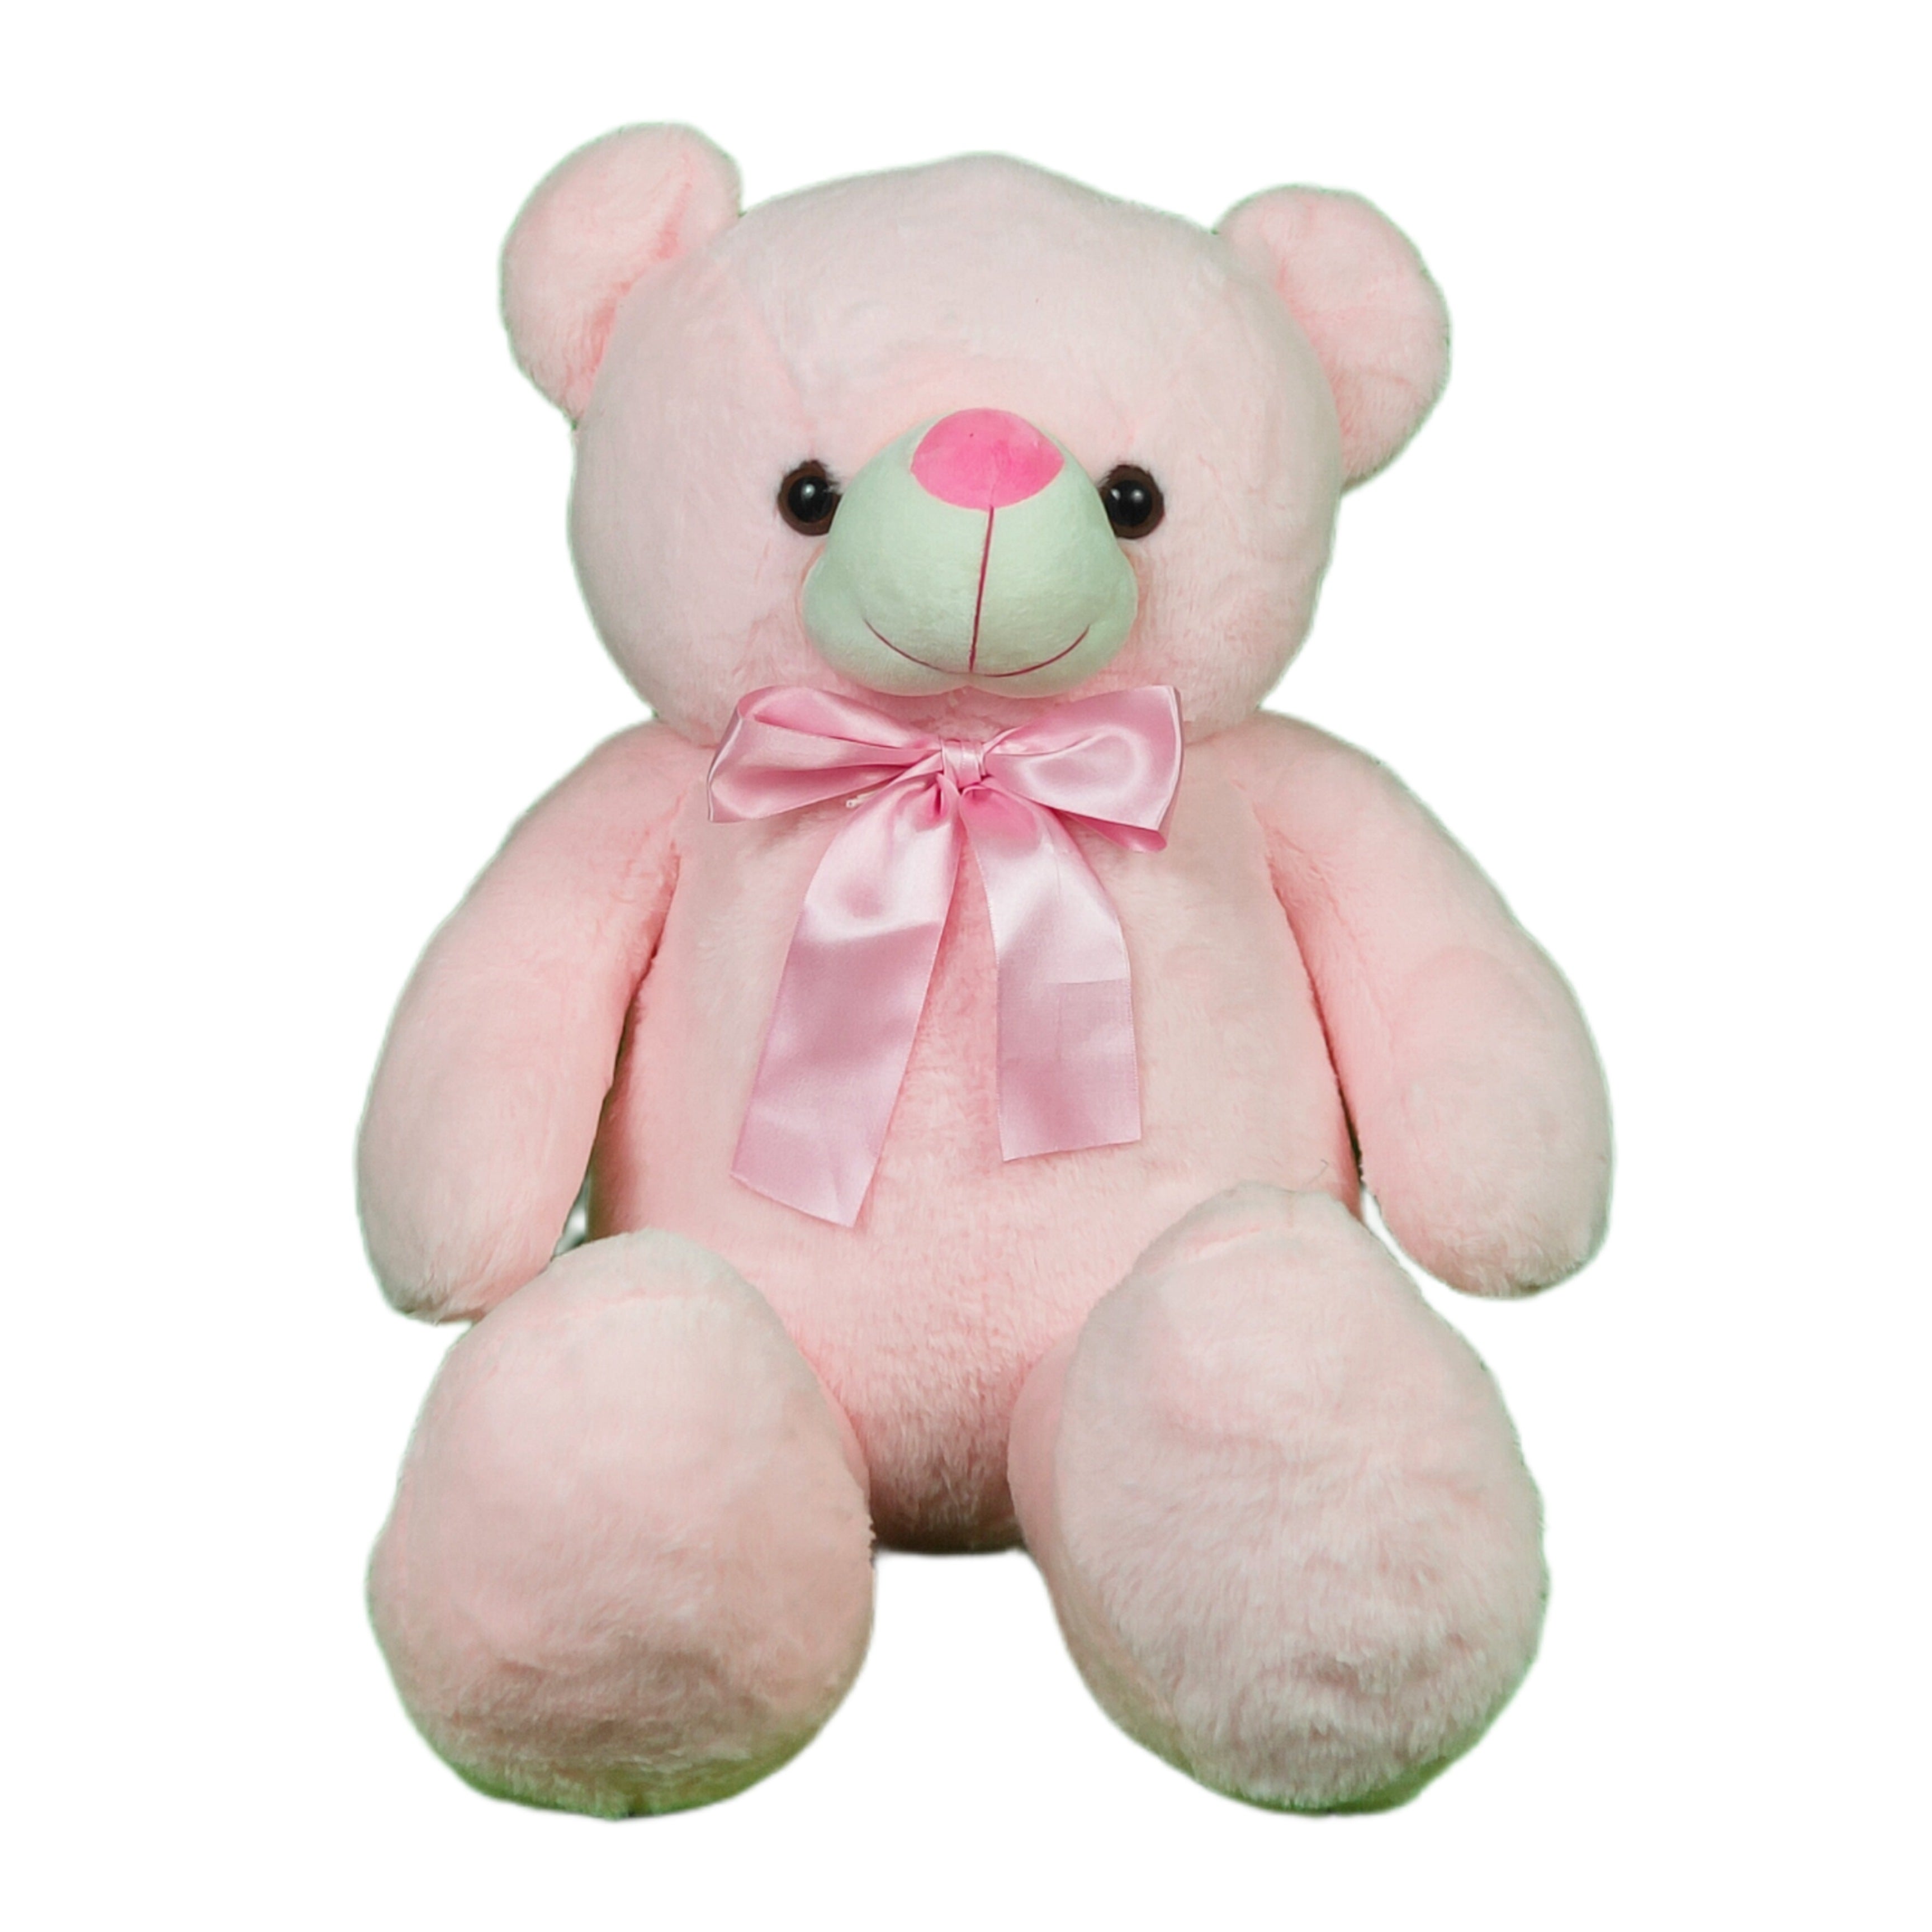 Soft Toys: Buy Teddy Bear online at best prices in India 